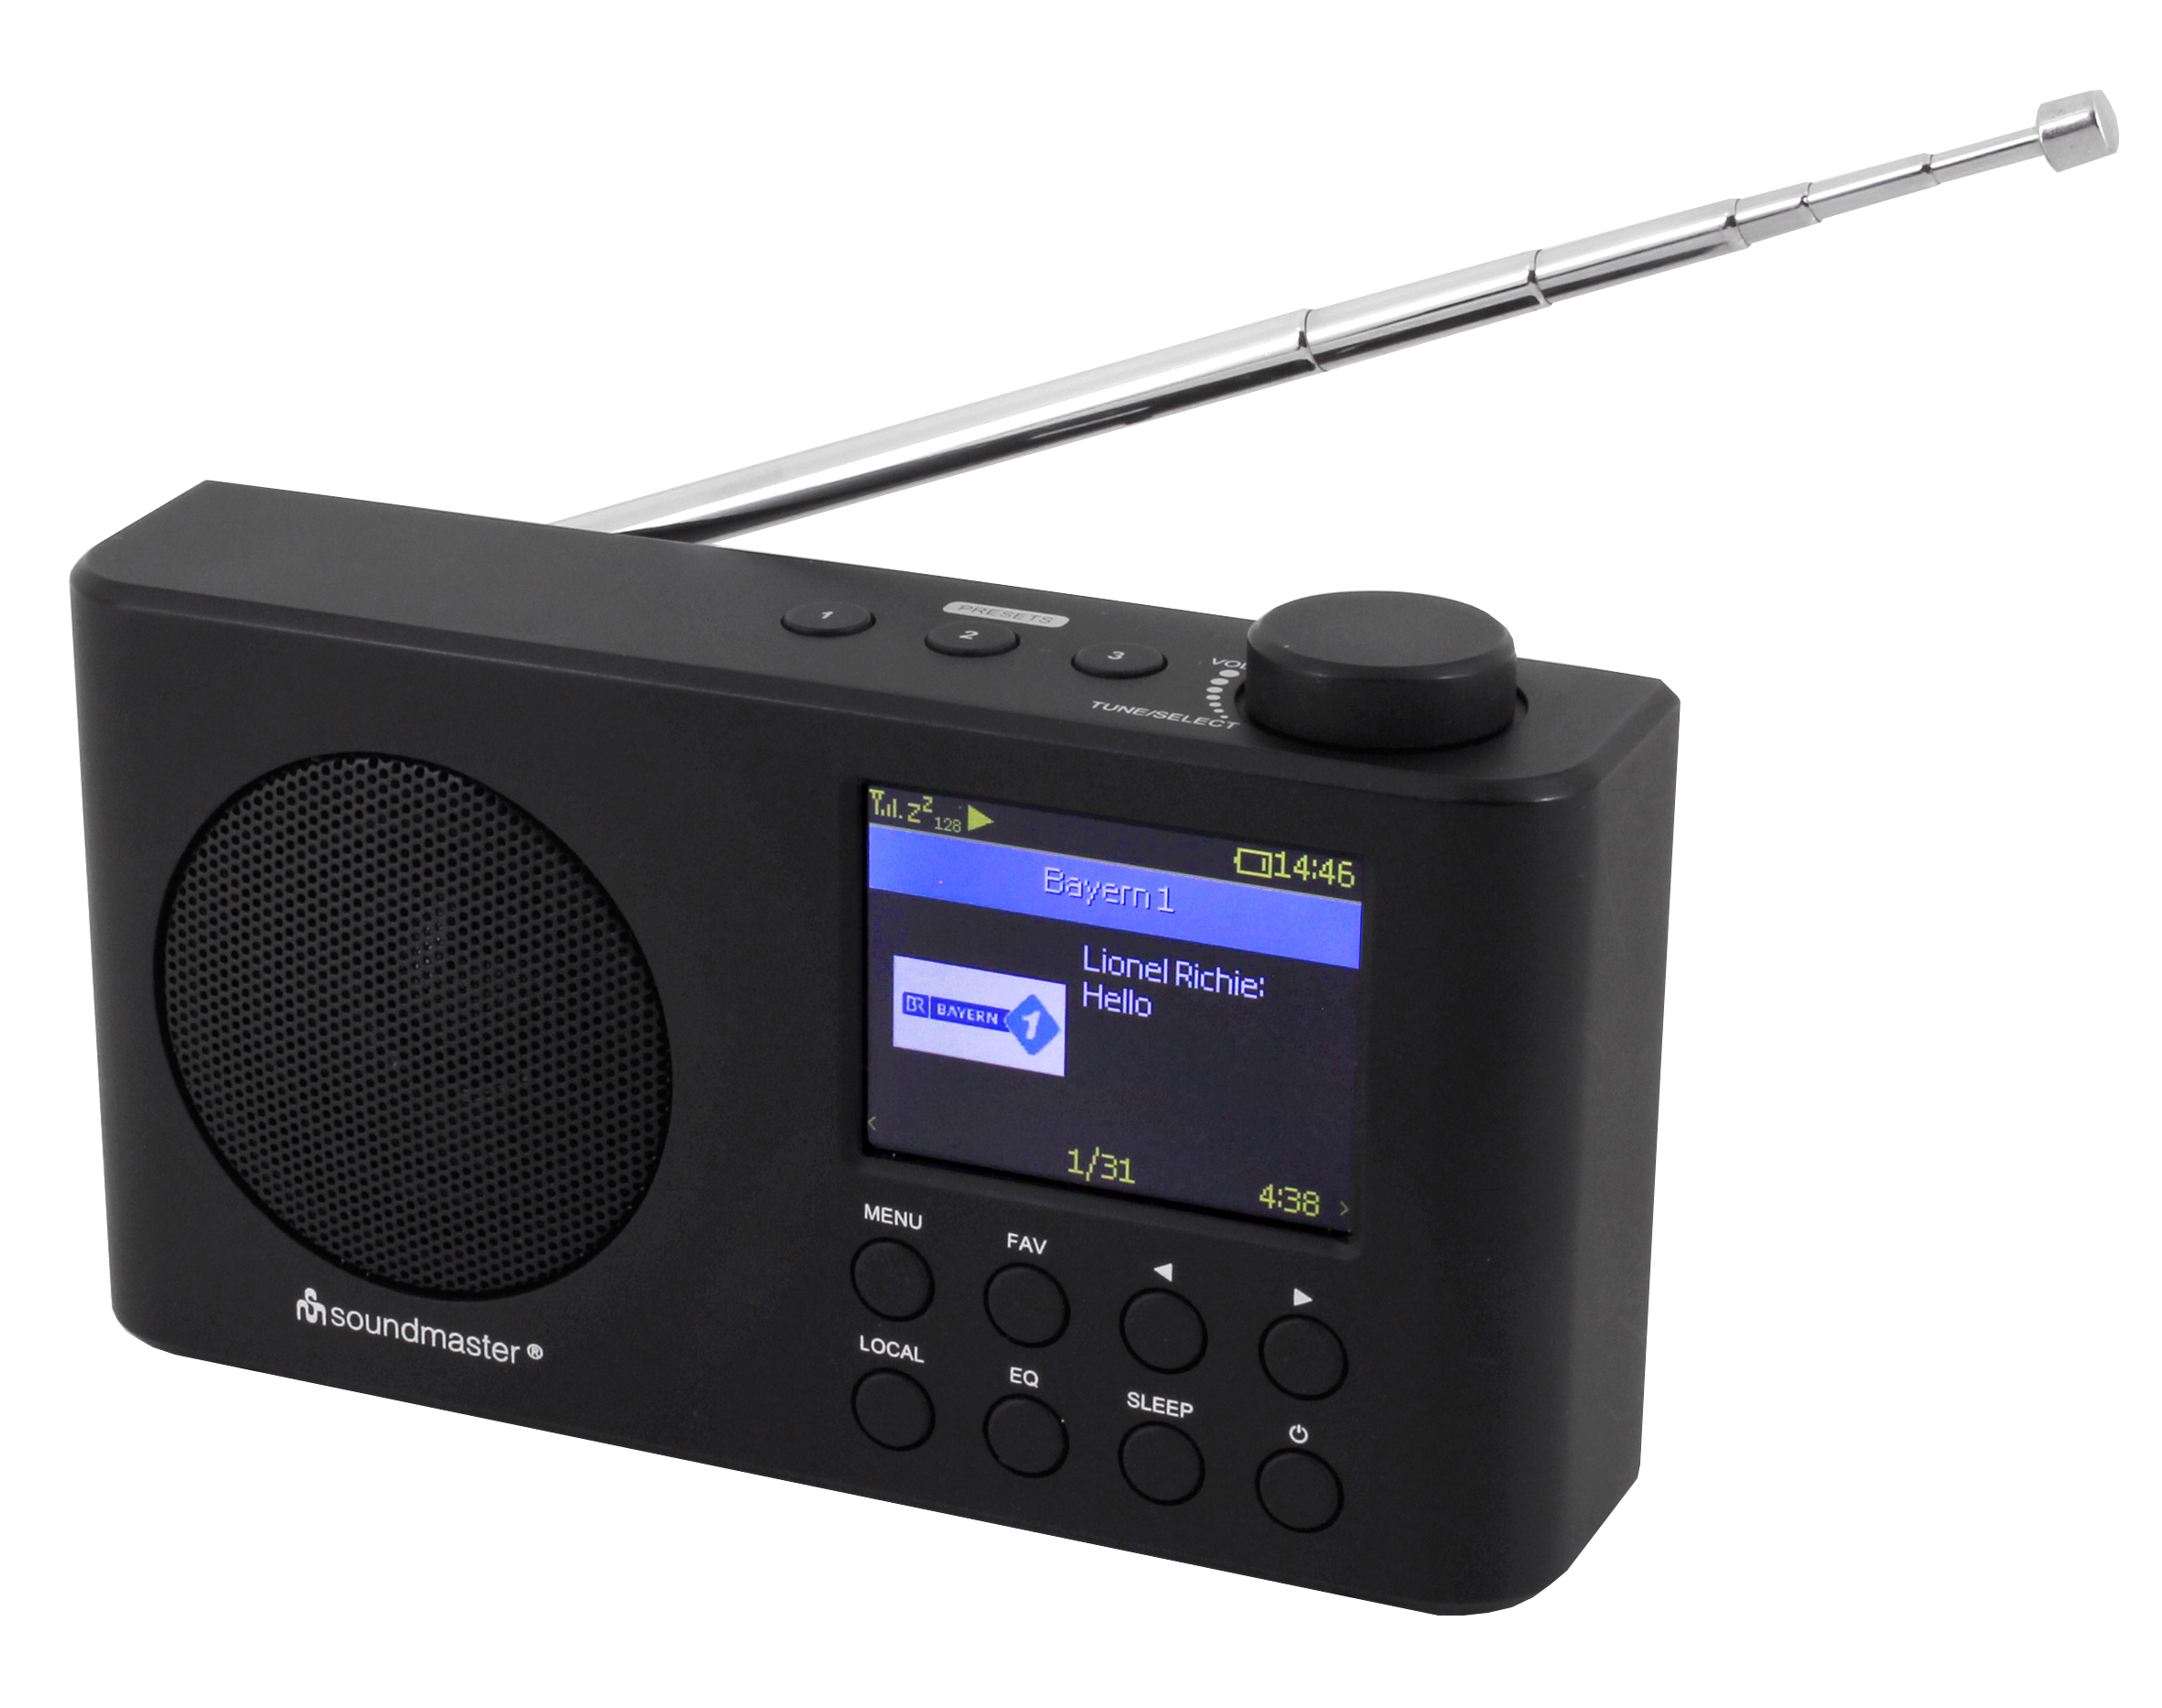 Portable WLAN-internet/DAB+/FM-radio with Bluetooth®, rechargeable